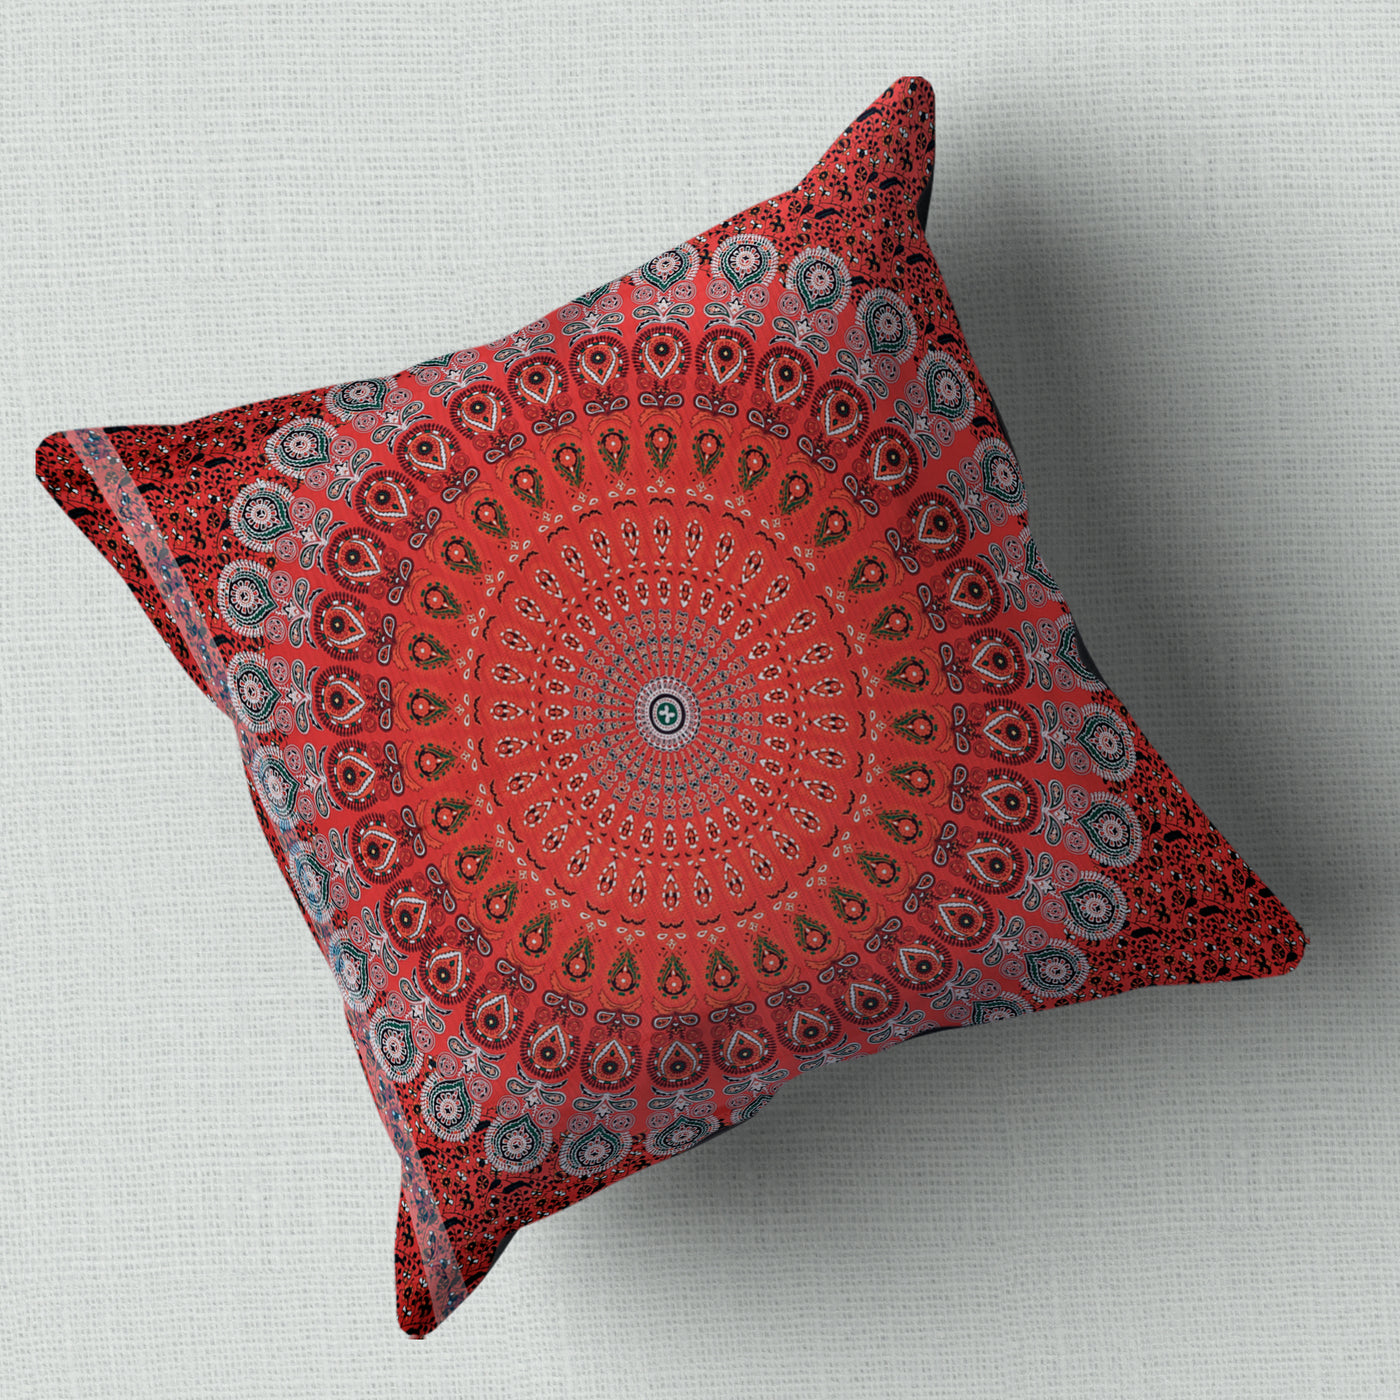 Enlightened Soul Red Cushion